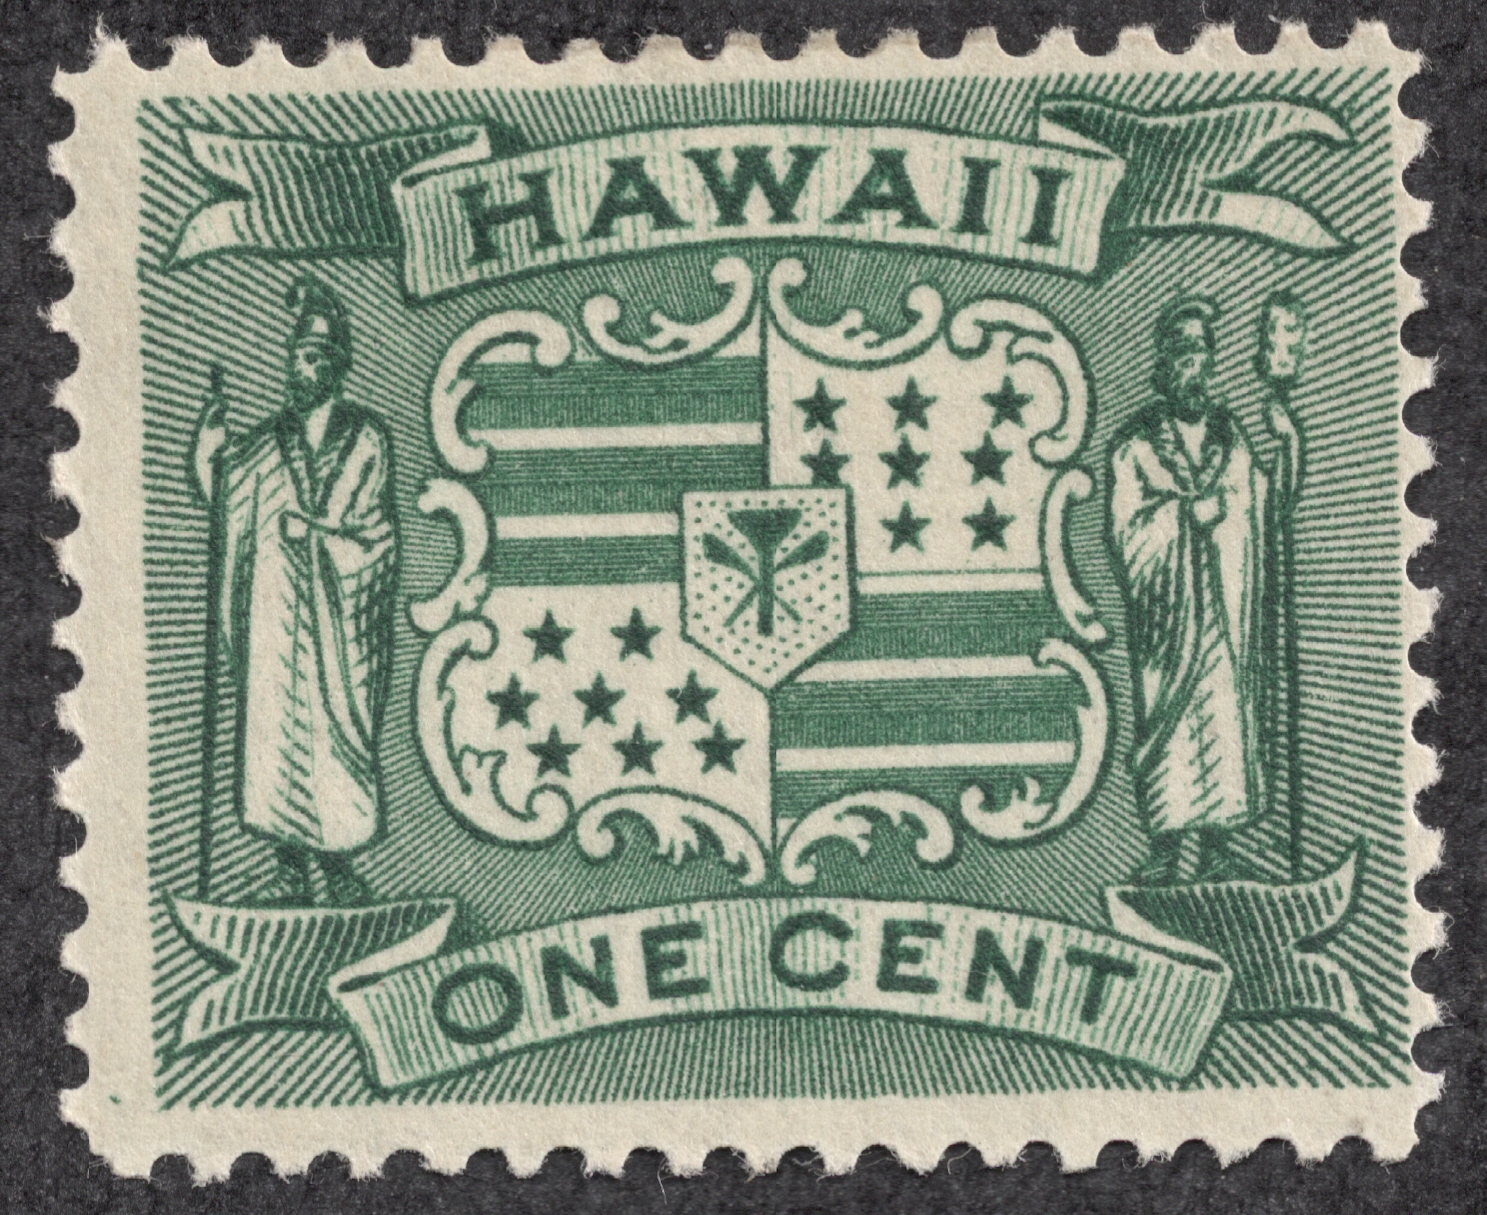 mail, postage stamps, USA, Republic of Hawaii, date of issue: 28.2.1894,  star, stars, year date 1893, , 19th century, mail, post, postage stamps,  postage stamp, USA, United States of America, republic, republics